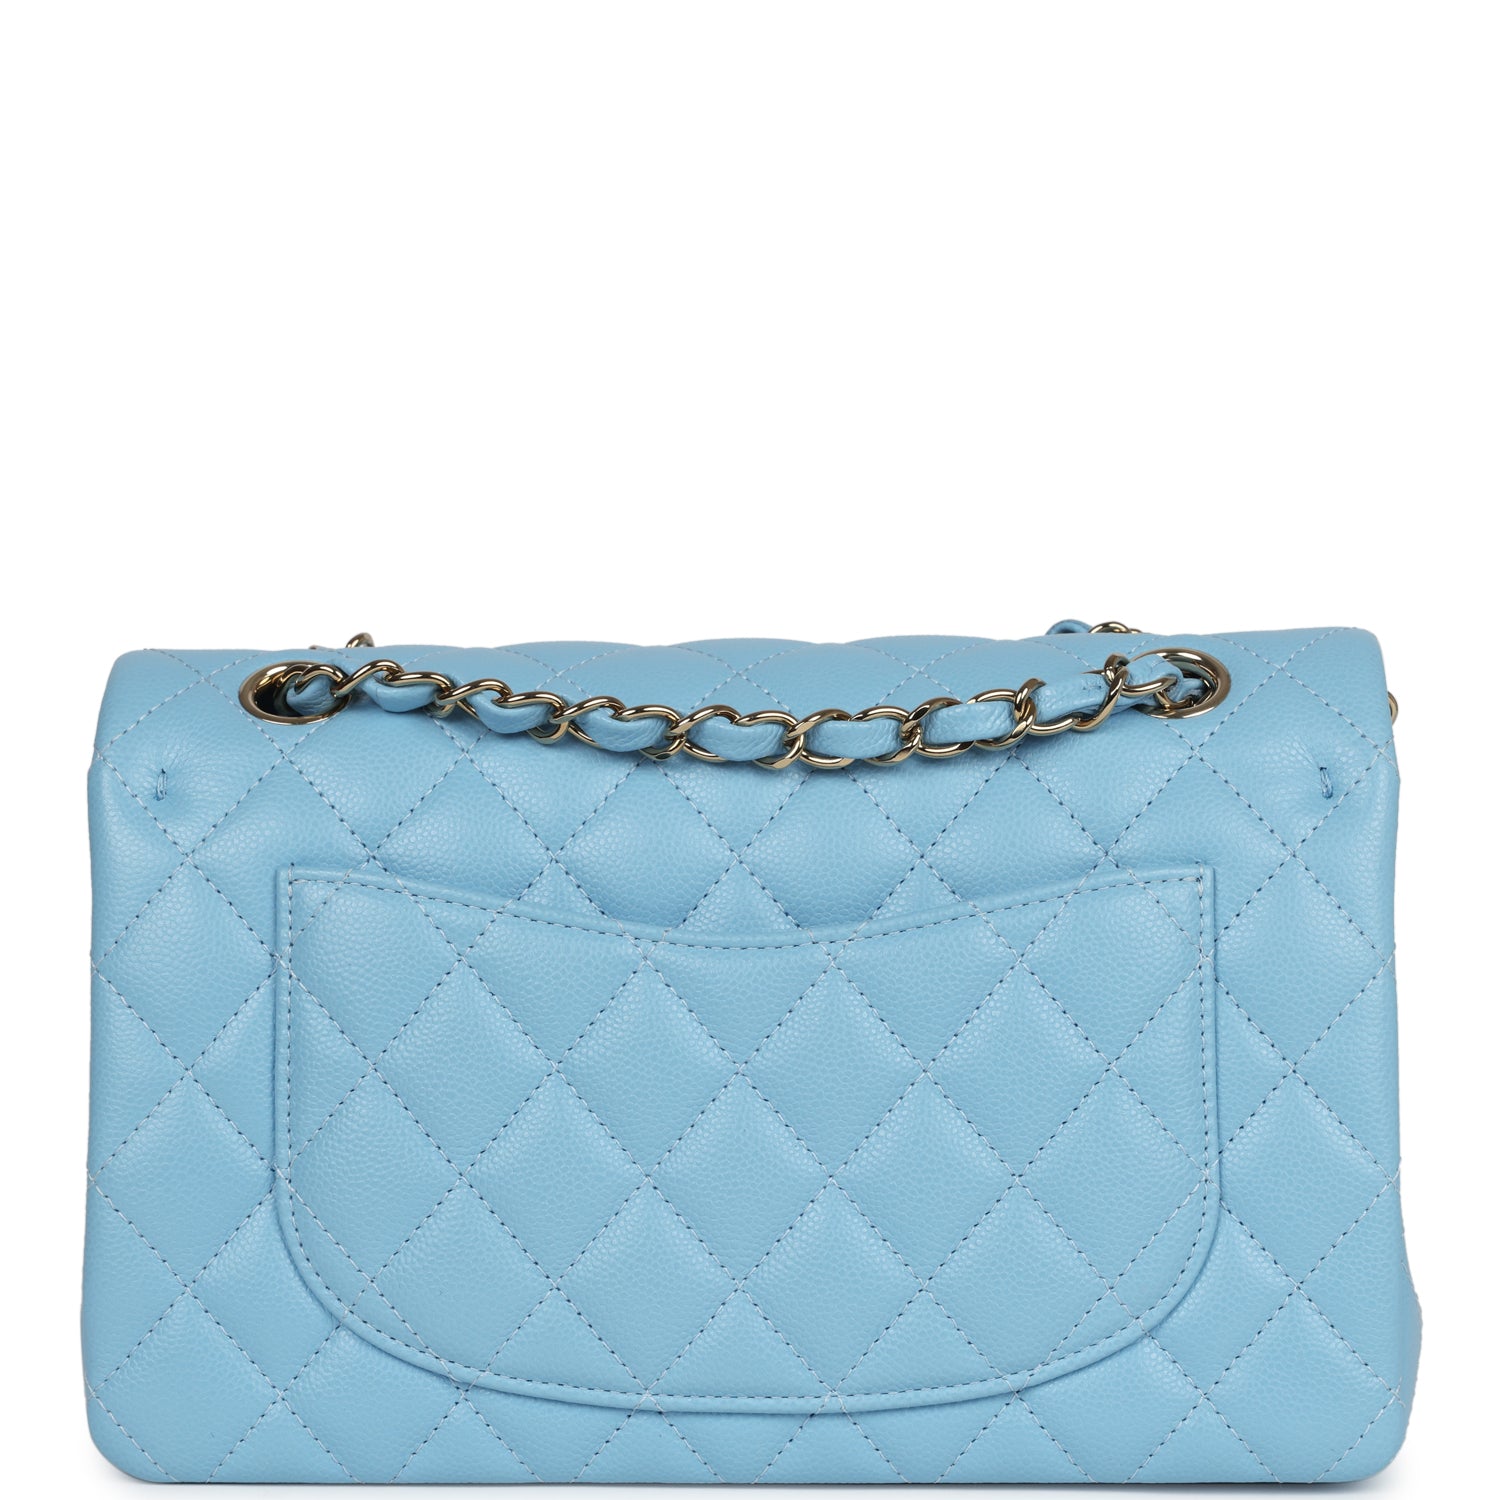 Chanel Small Classic Double Flap Bag Light Blue Caviar Gold Hardware ...